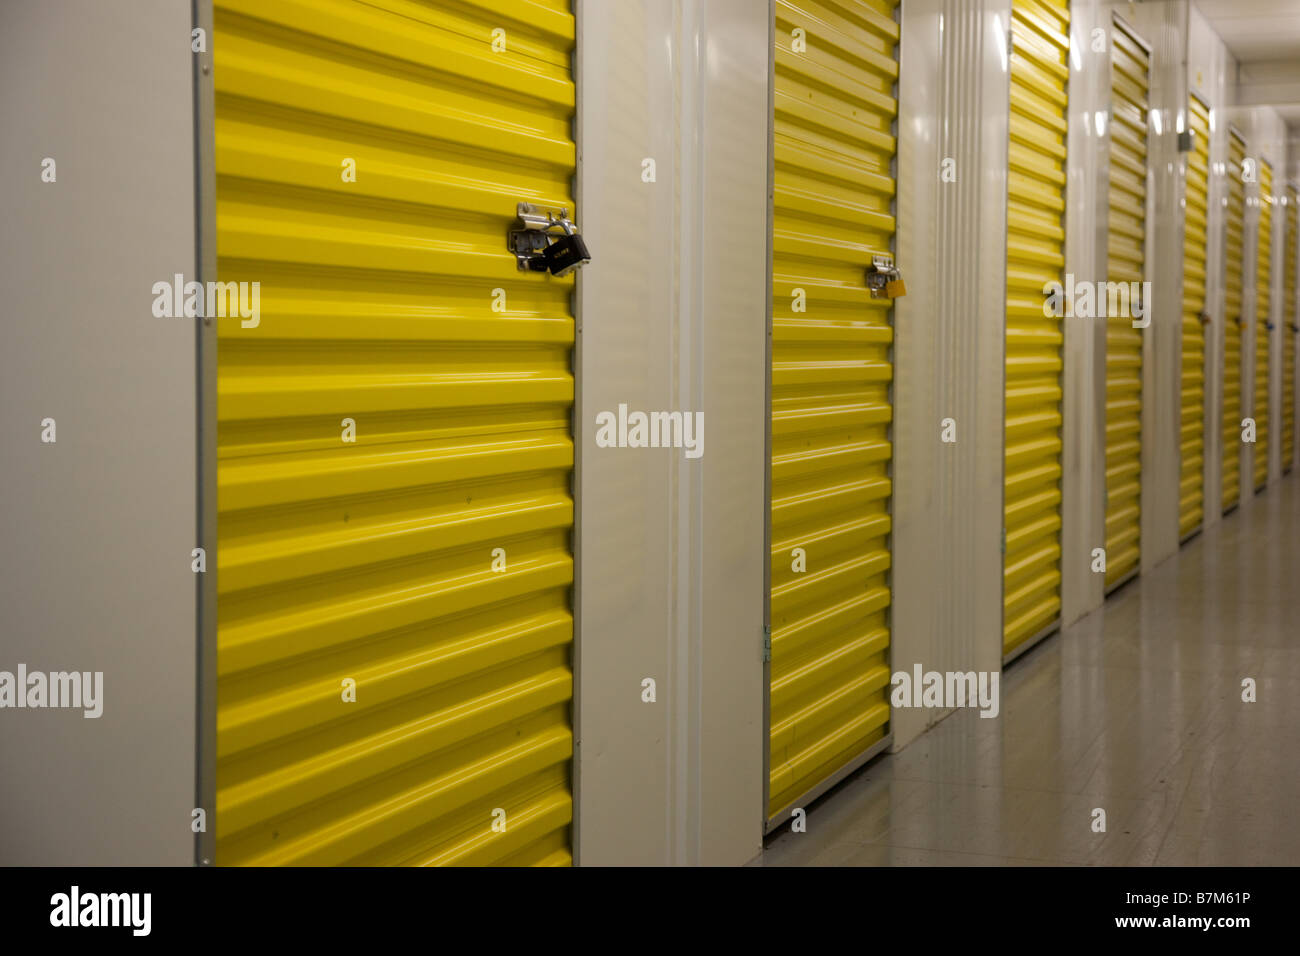 Secure storage units in a self storage facility Stock Photo